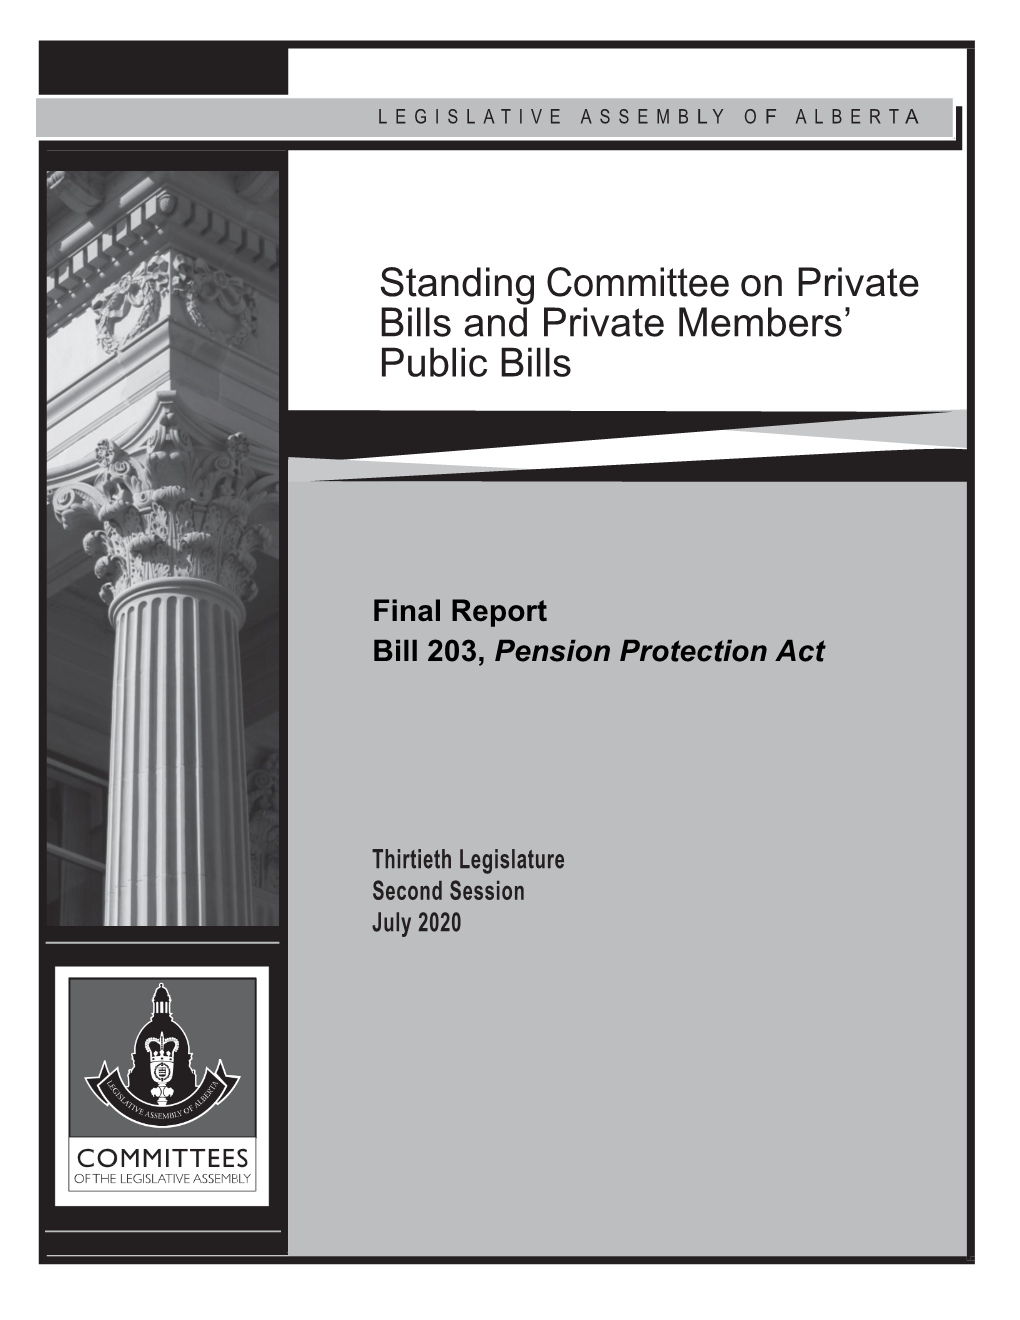 Standing Committee on Private Bills and Private Members' Public Bills